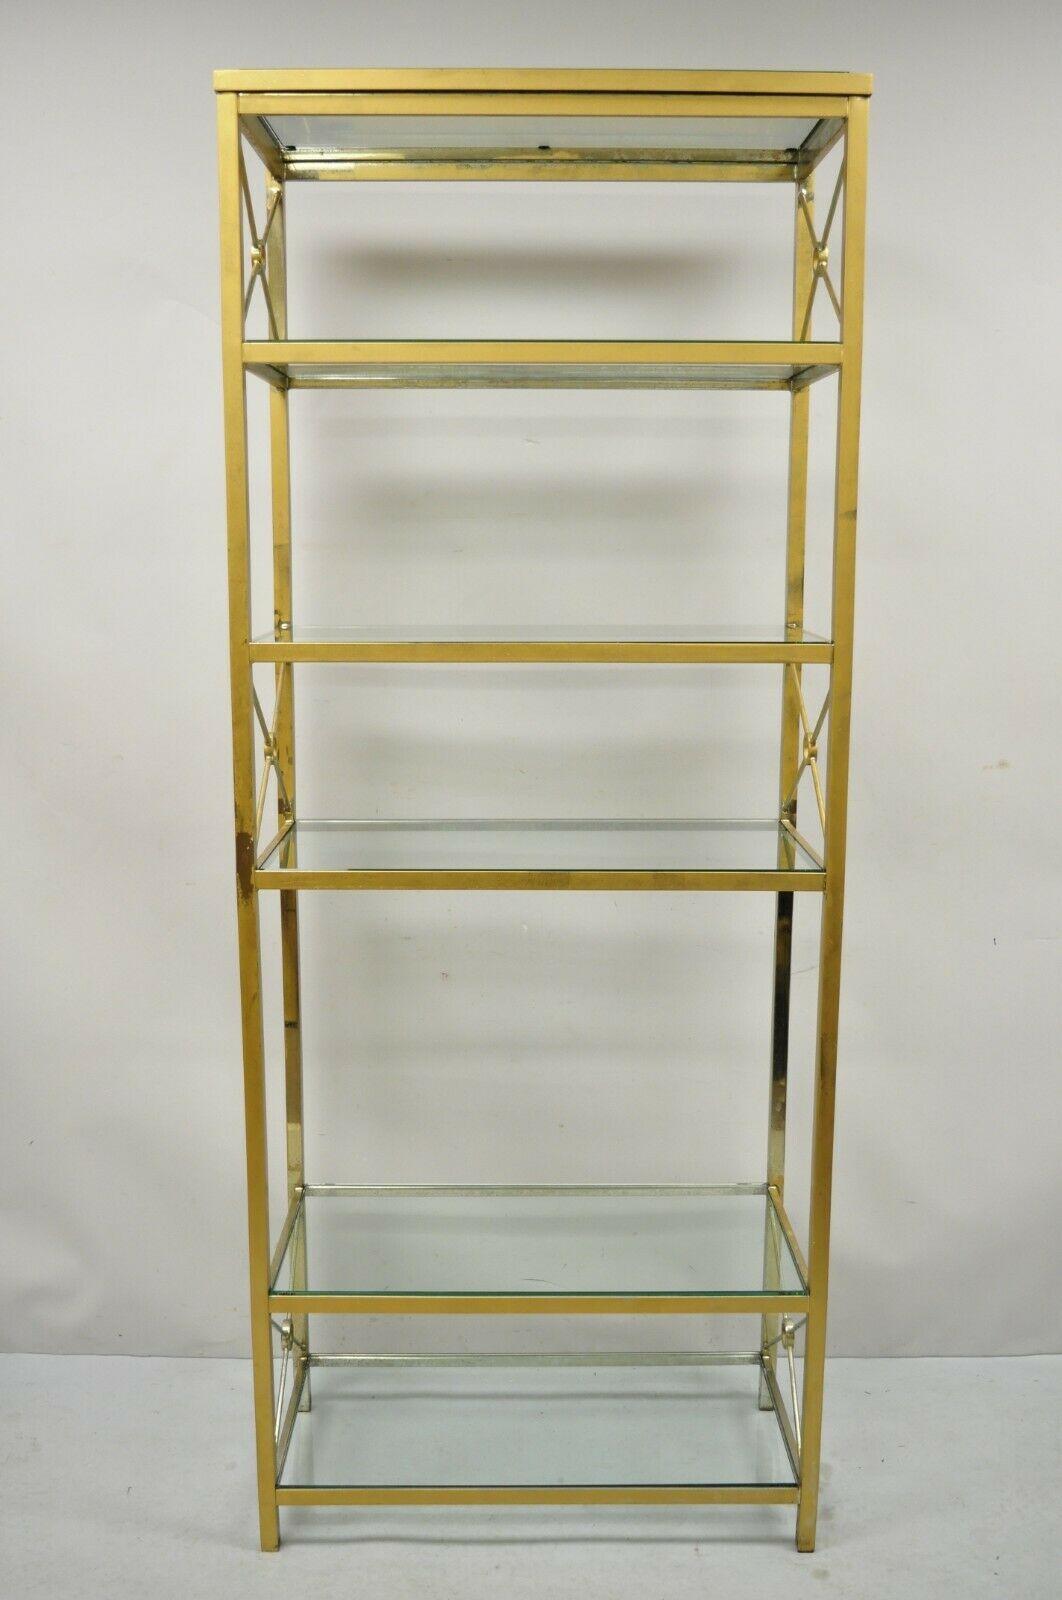 Vintage Brass Metal Gold X-Form Tall Hollywood Regency Modern Curio shelf bookcase. Item features a brass plated metal frame, x-form design, 6 glass shelves, very nice vintage item, clean modernist lines, quality craftsmanship, great style and form.